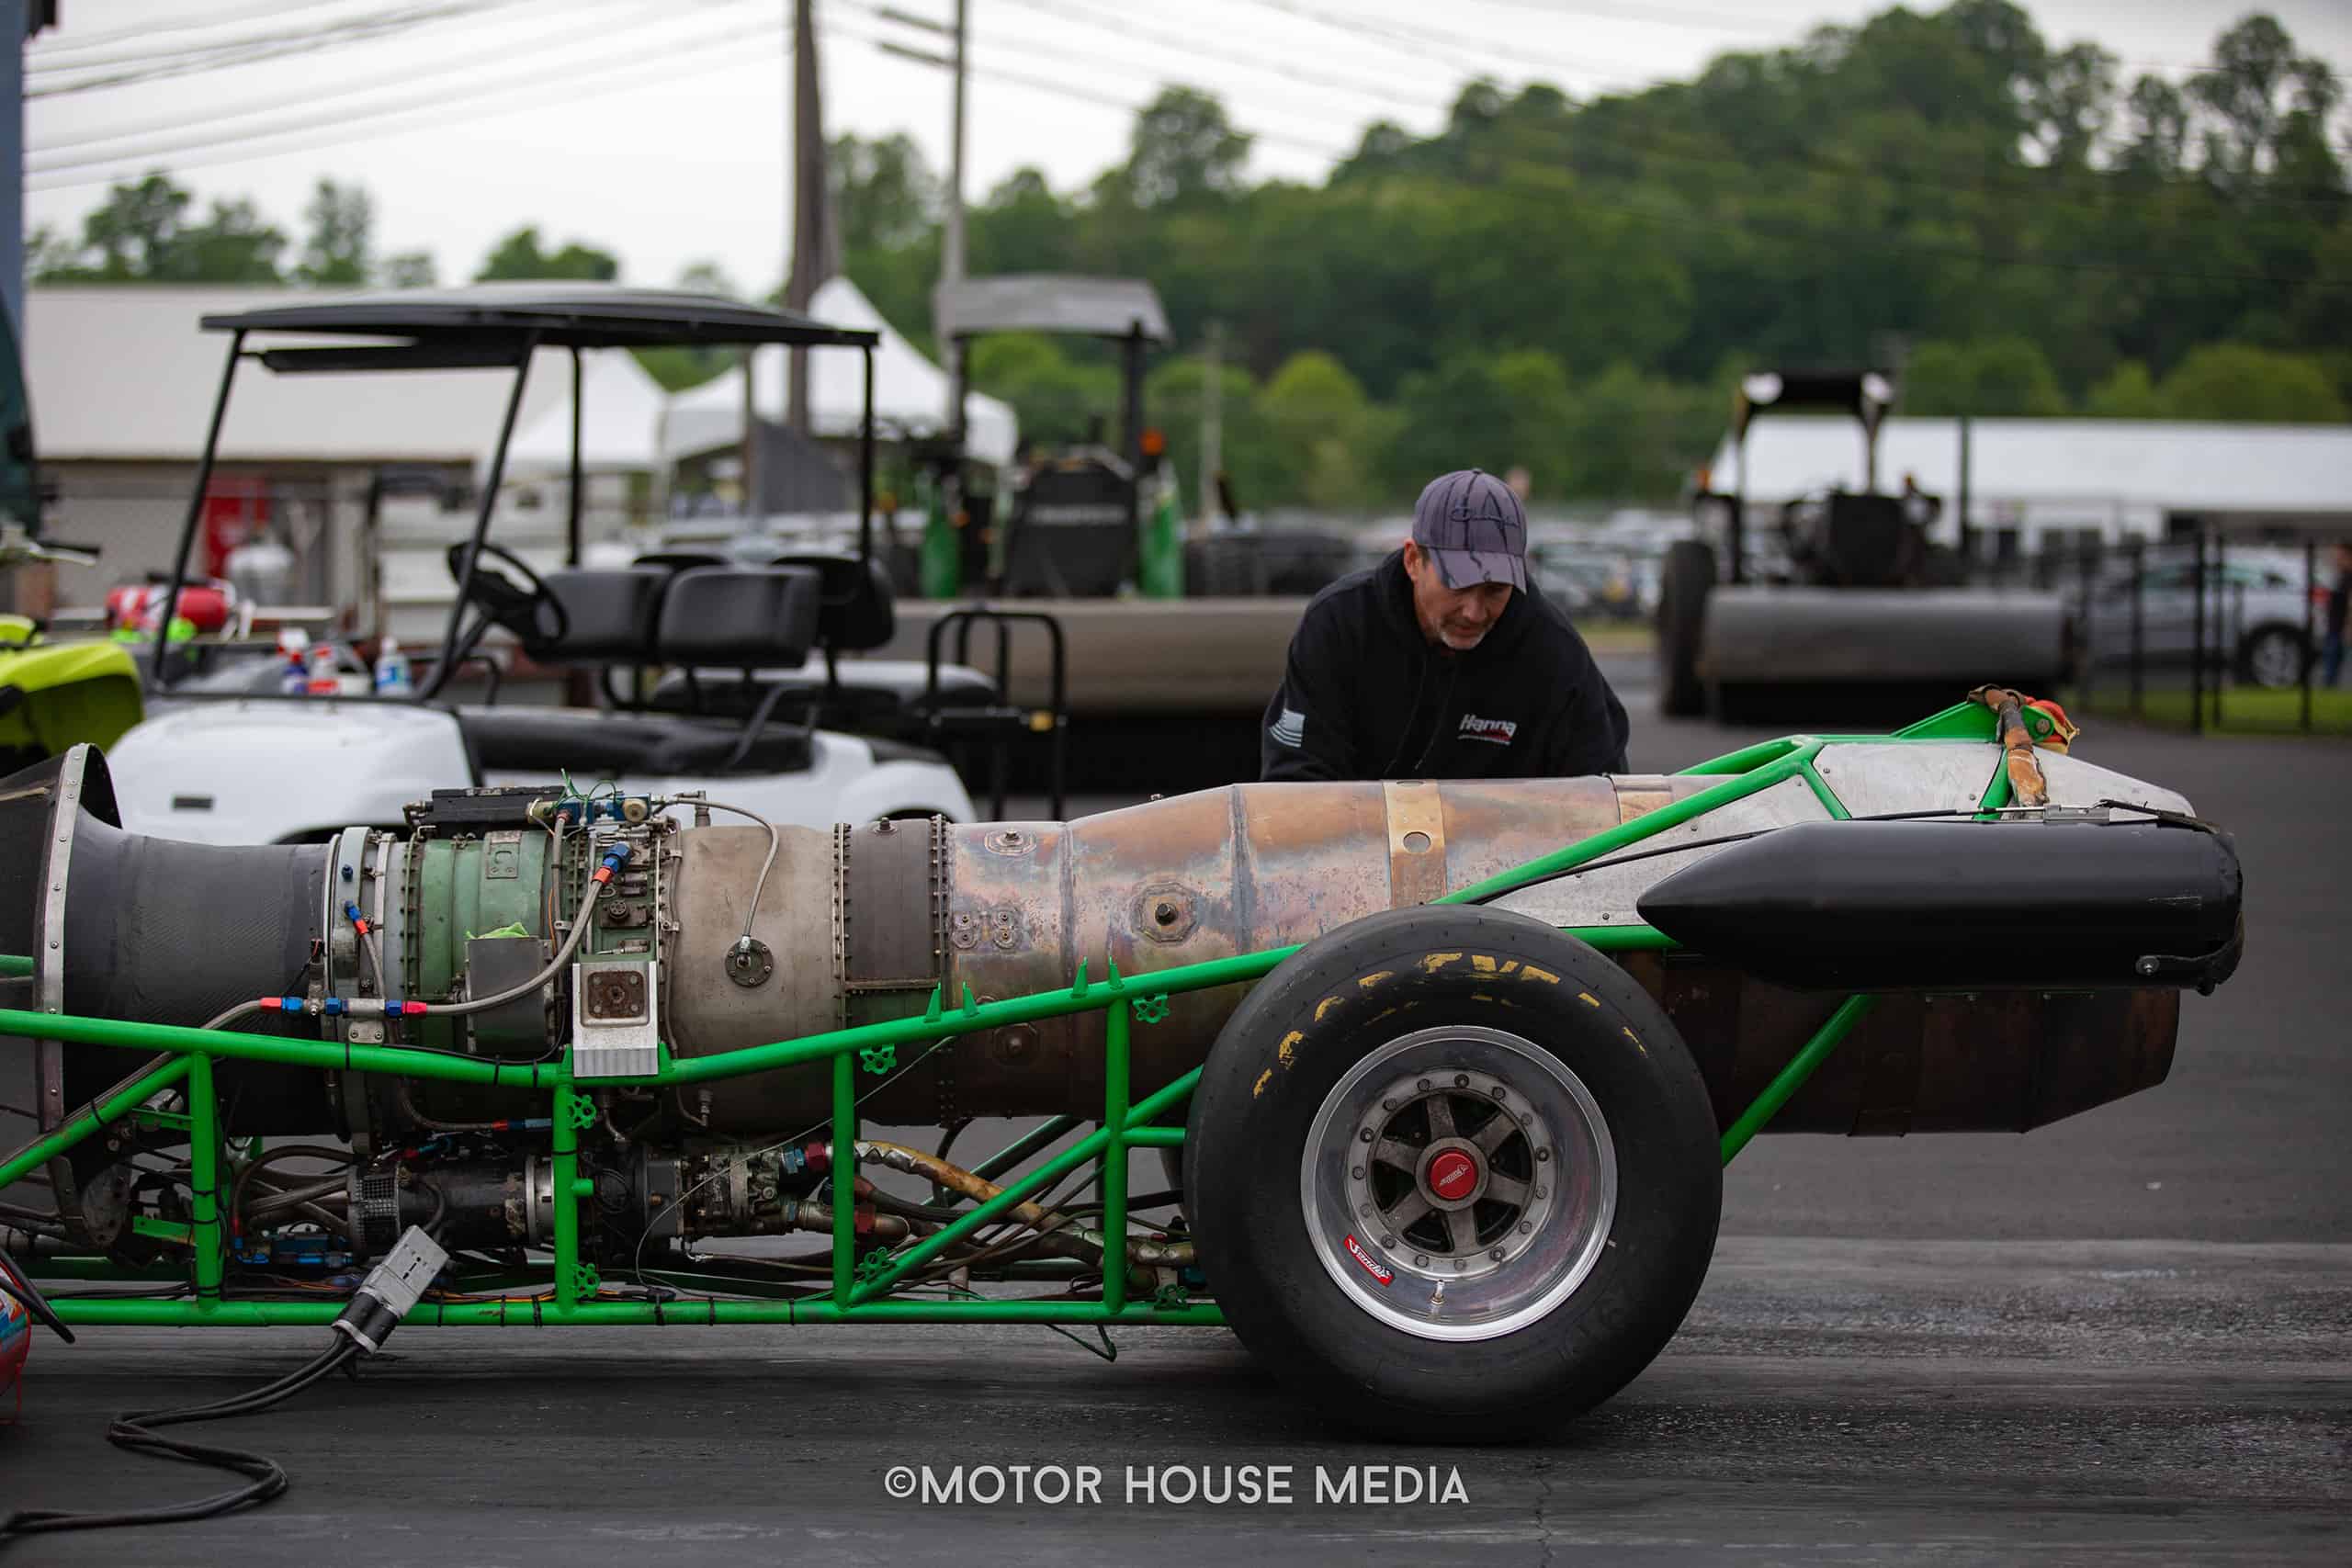 Jet dragster from The Turn 5 auto show featuring Cars, trucks & Jeeps